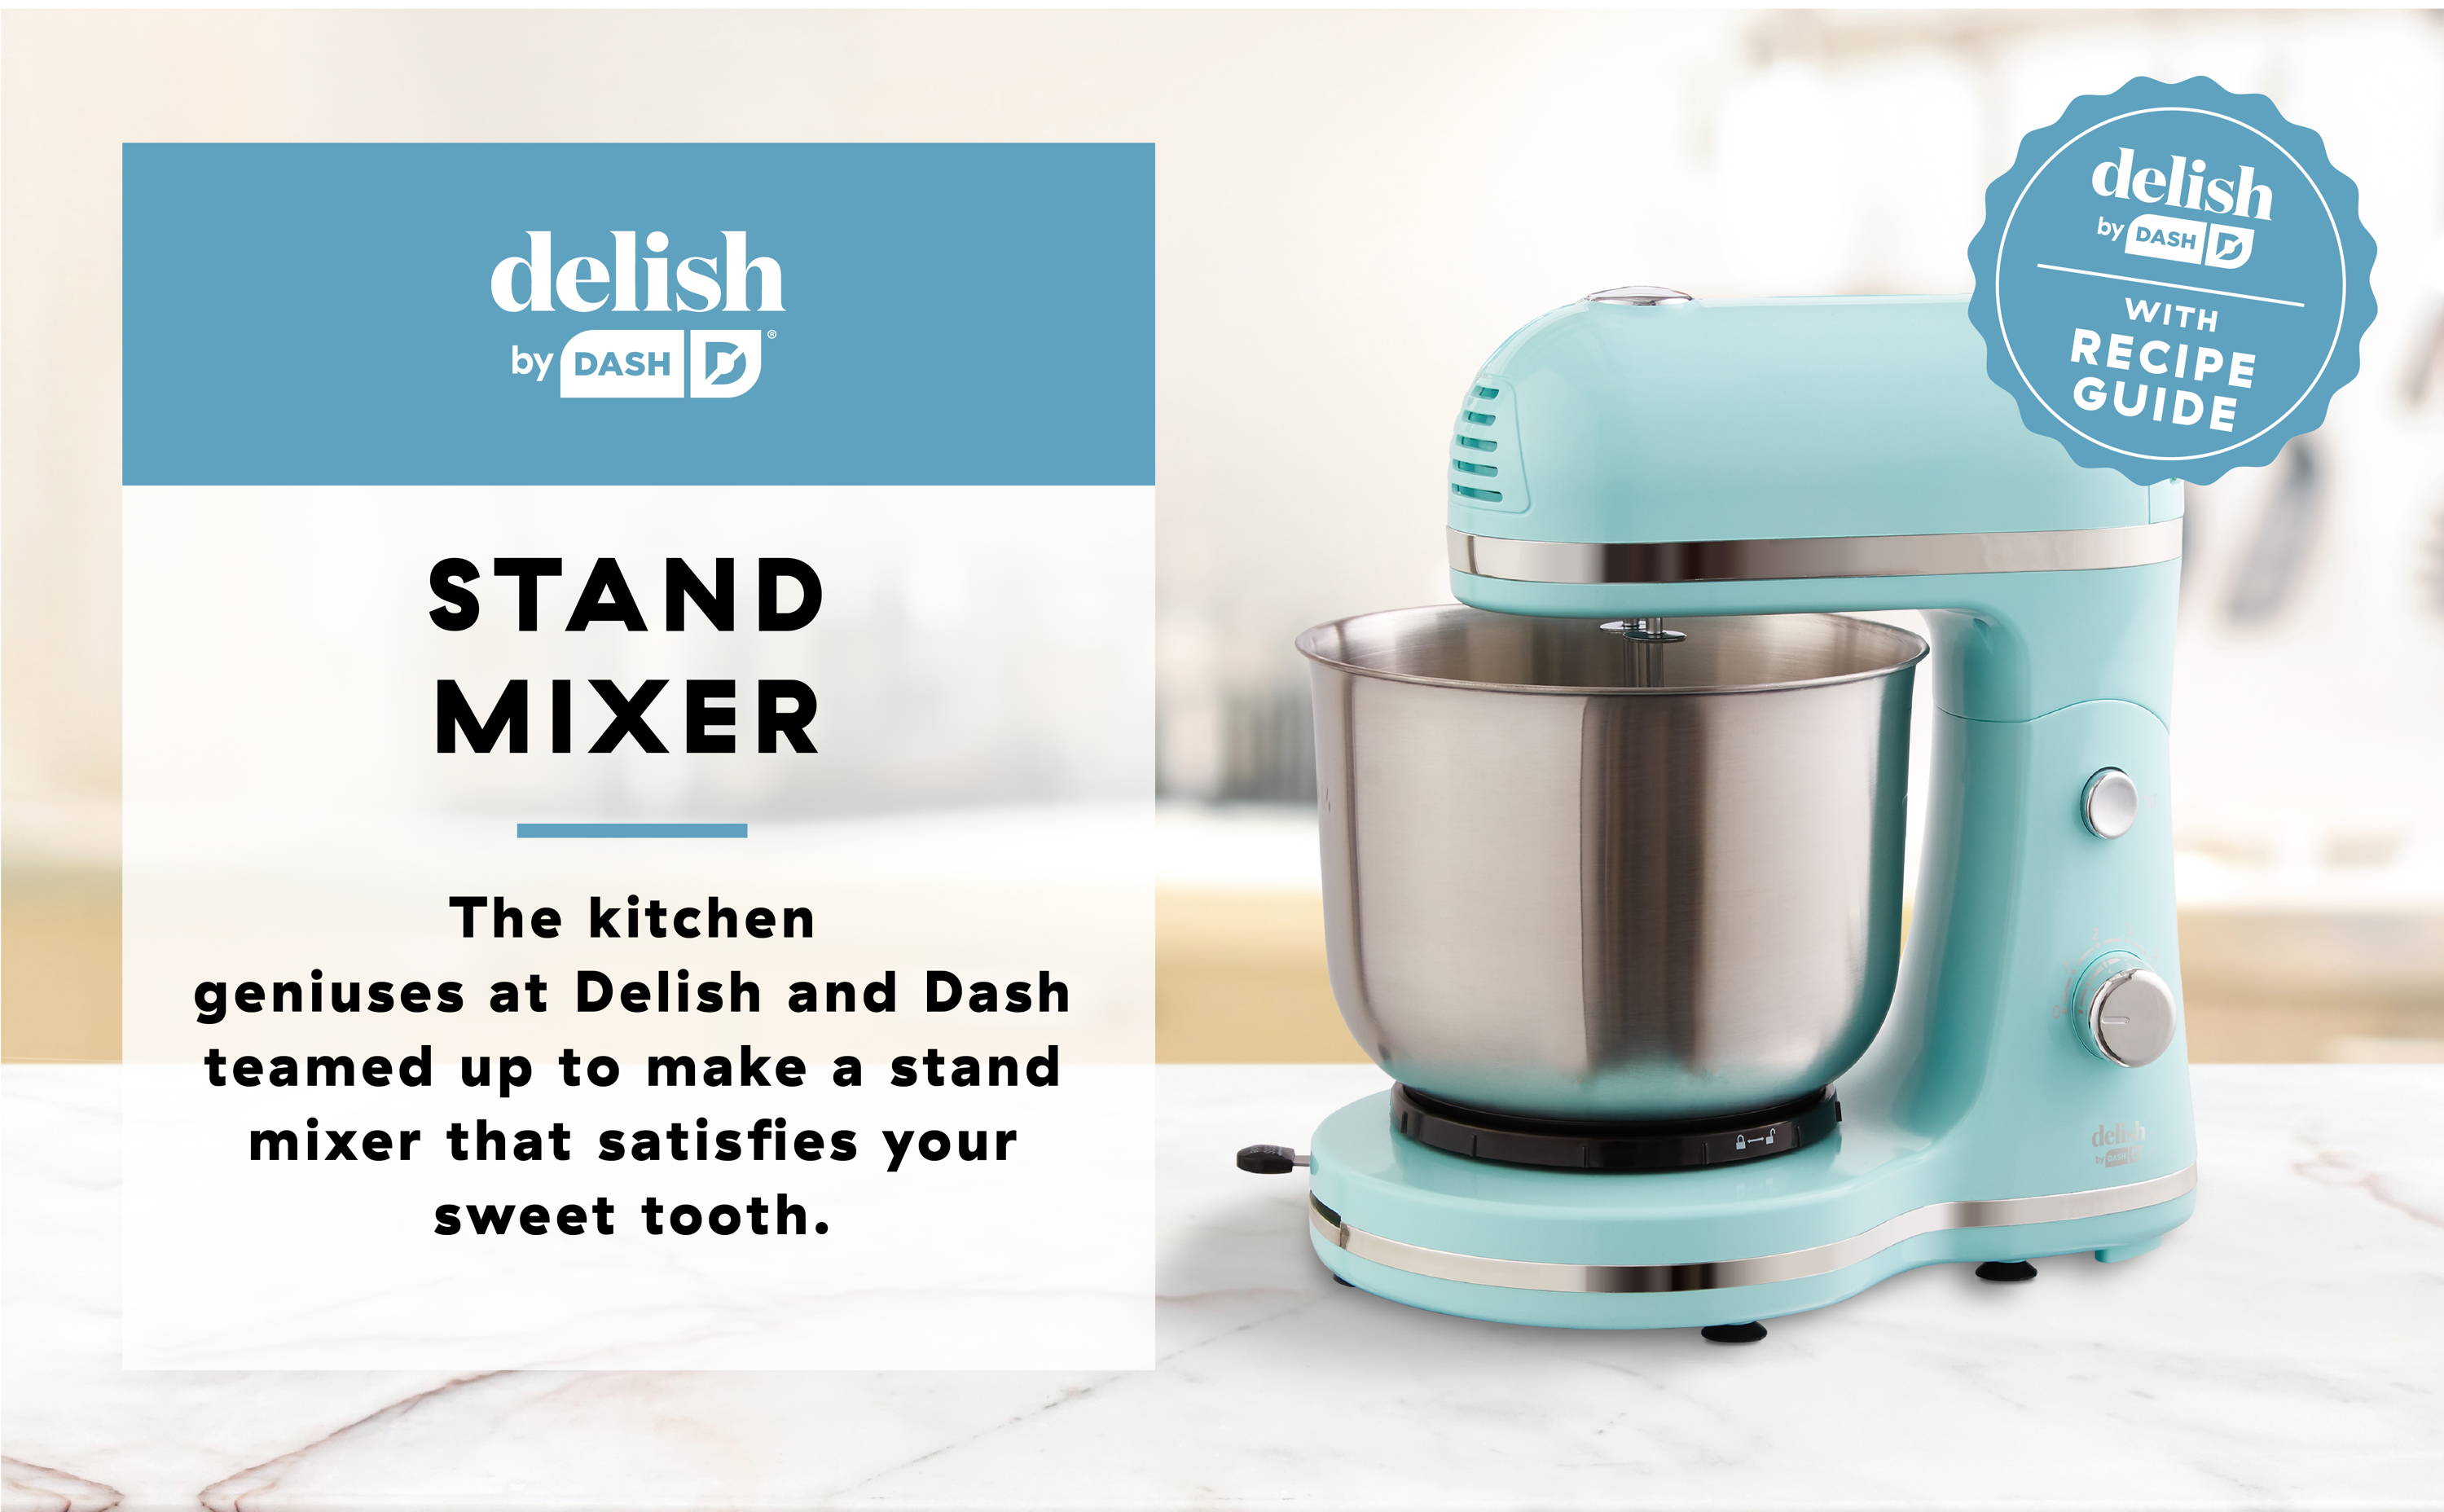 DASH Delish by Dash Compact Stand Mixer 3.5 Quart with Beaters & Dough Hooks Included DCSM350GB Black Renewed 